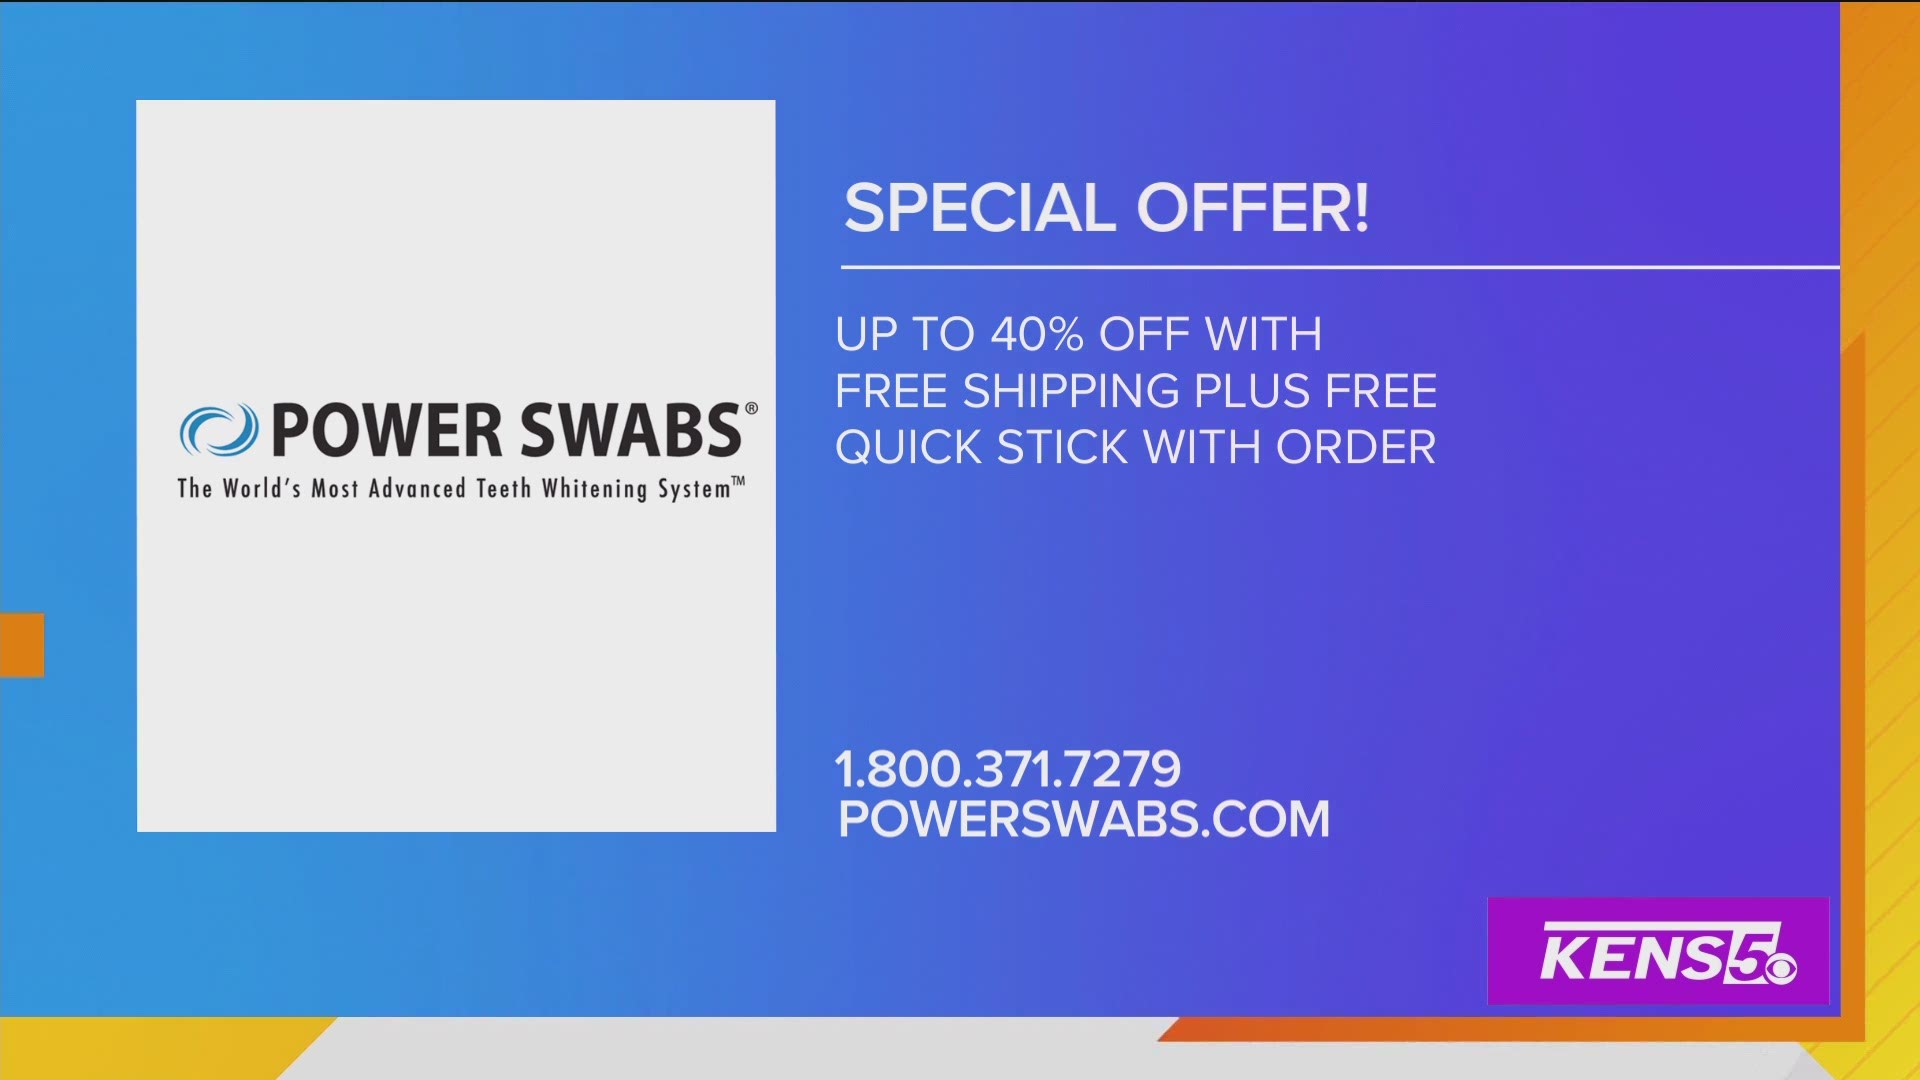 Power Swabs is offering their biggest discount EVER for their teeth whitening kit. Learn more at PowerSwabs.com